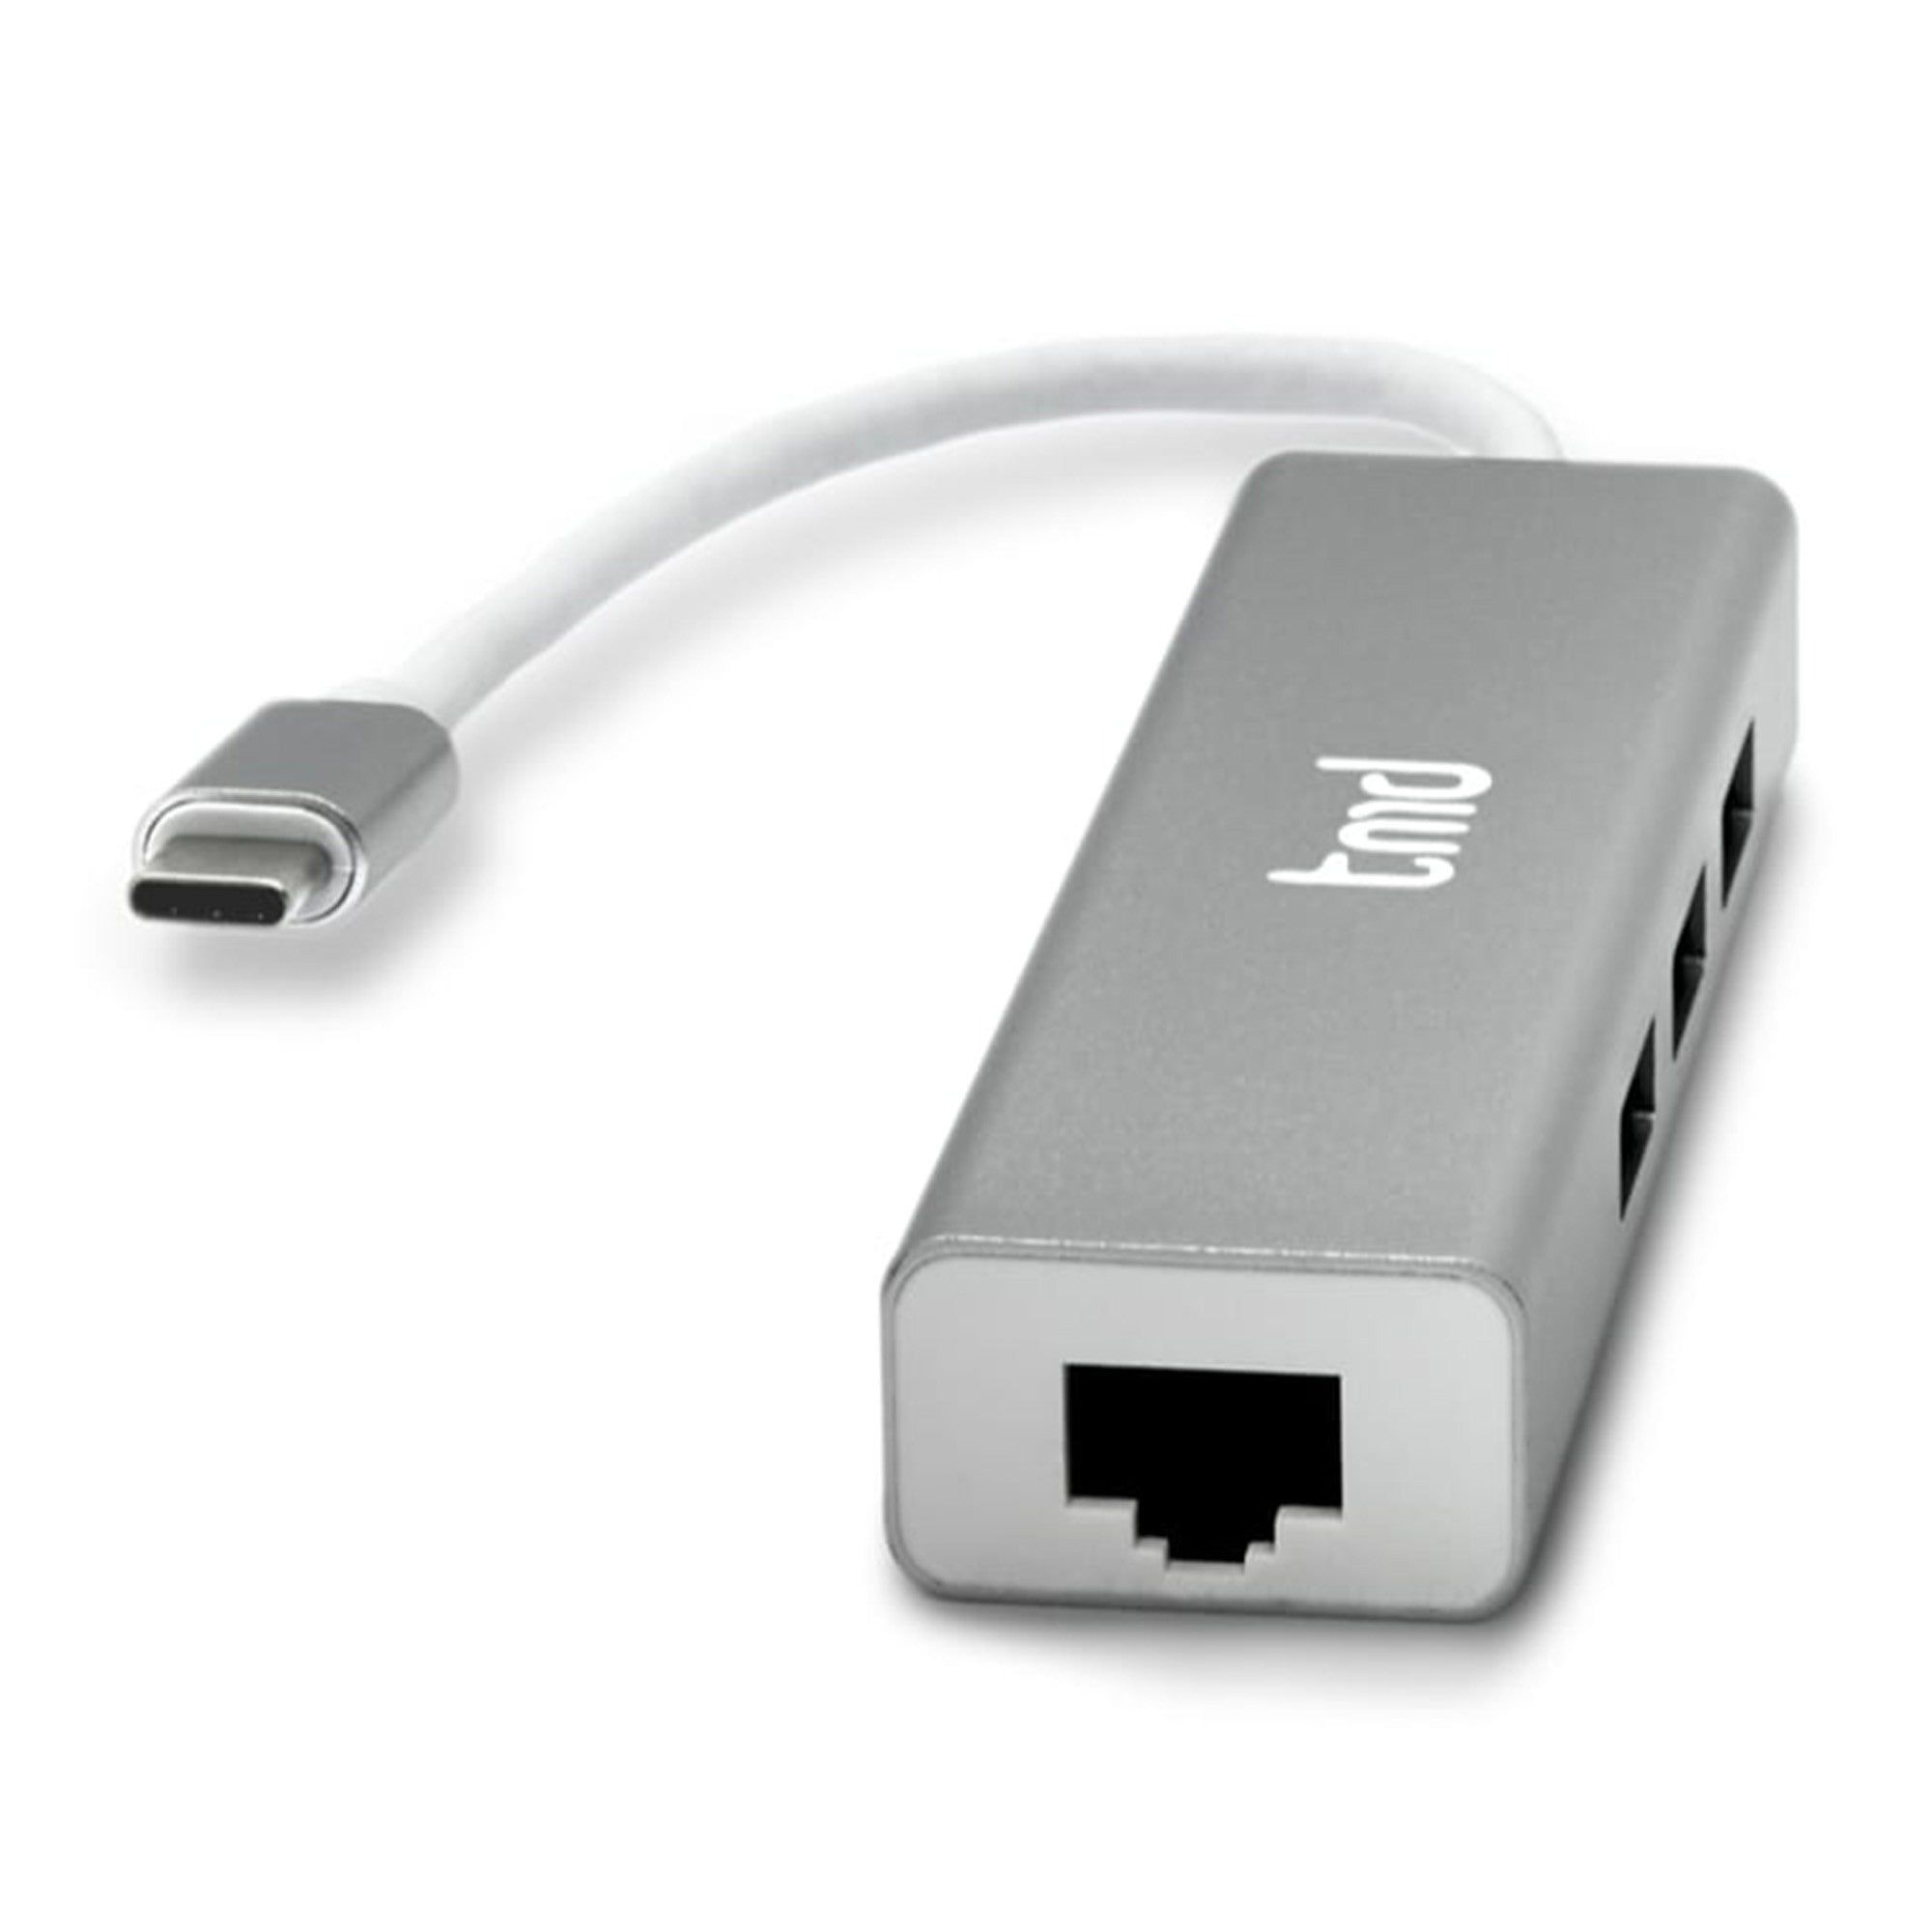 tmd USB-C to Ethernet/USB x 3 Adapter - Silver - 15-10490